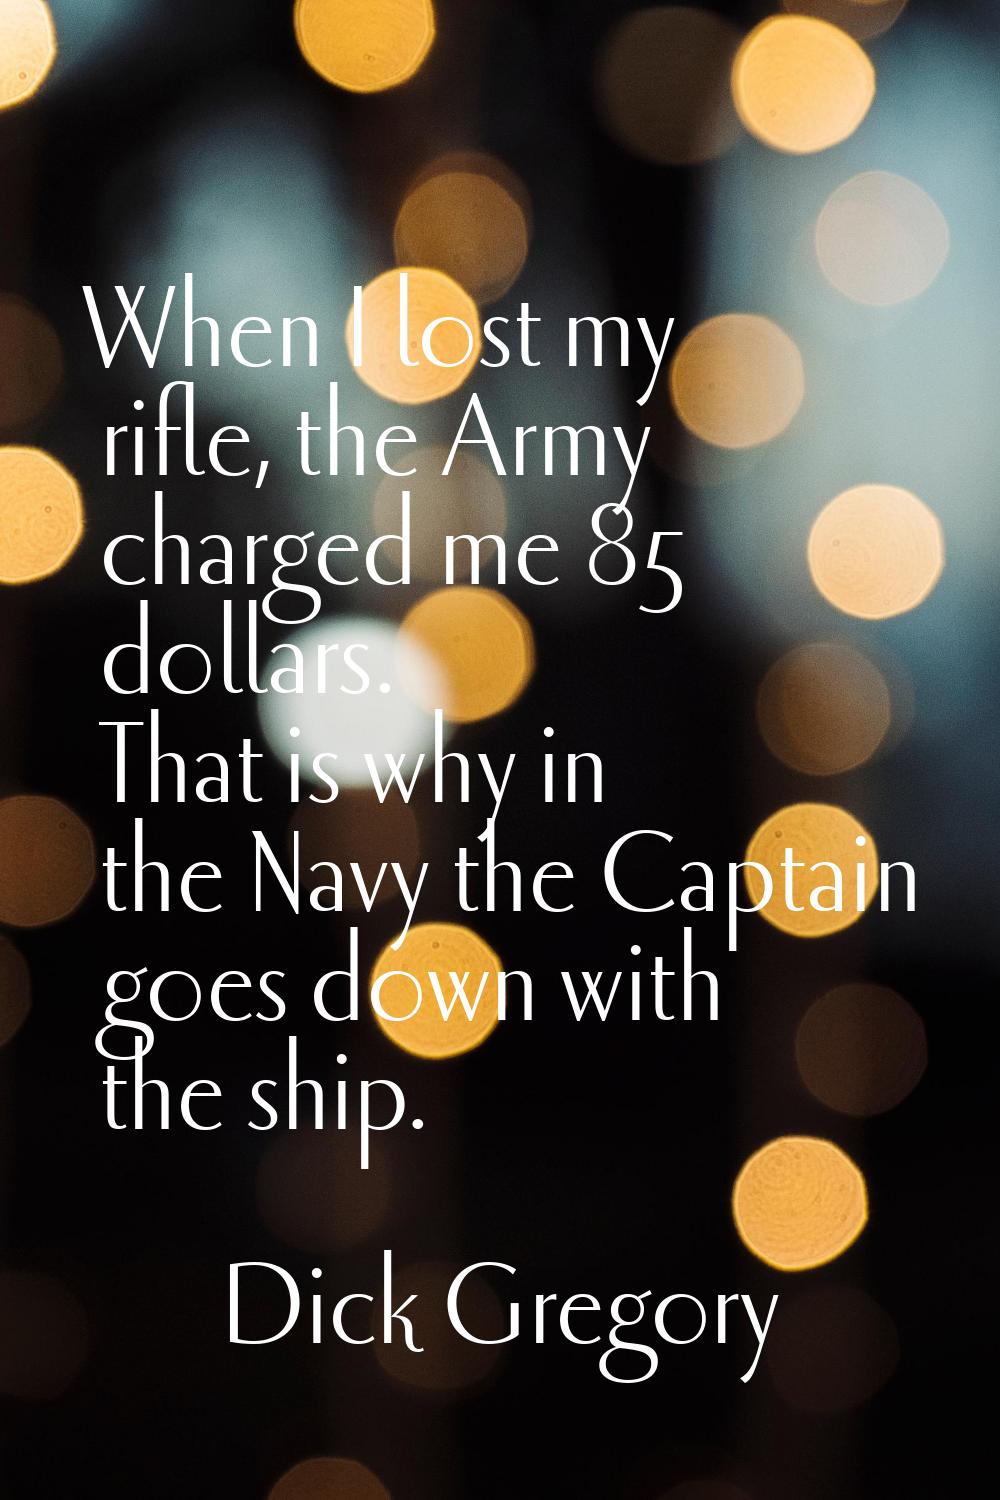 When I lost my rifle, the Army charged me 85 dollars. That is why in the Navy the Captain goes down